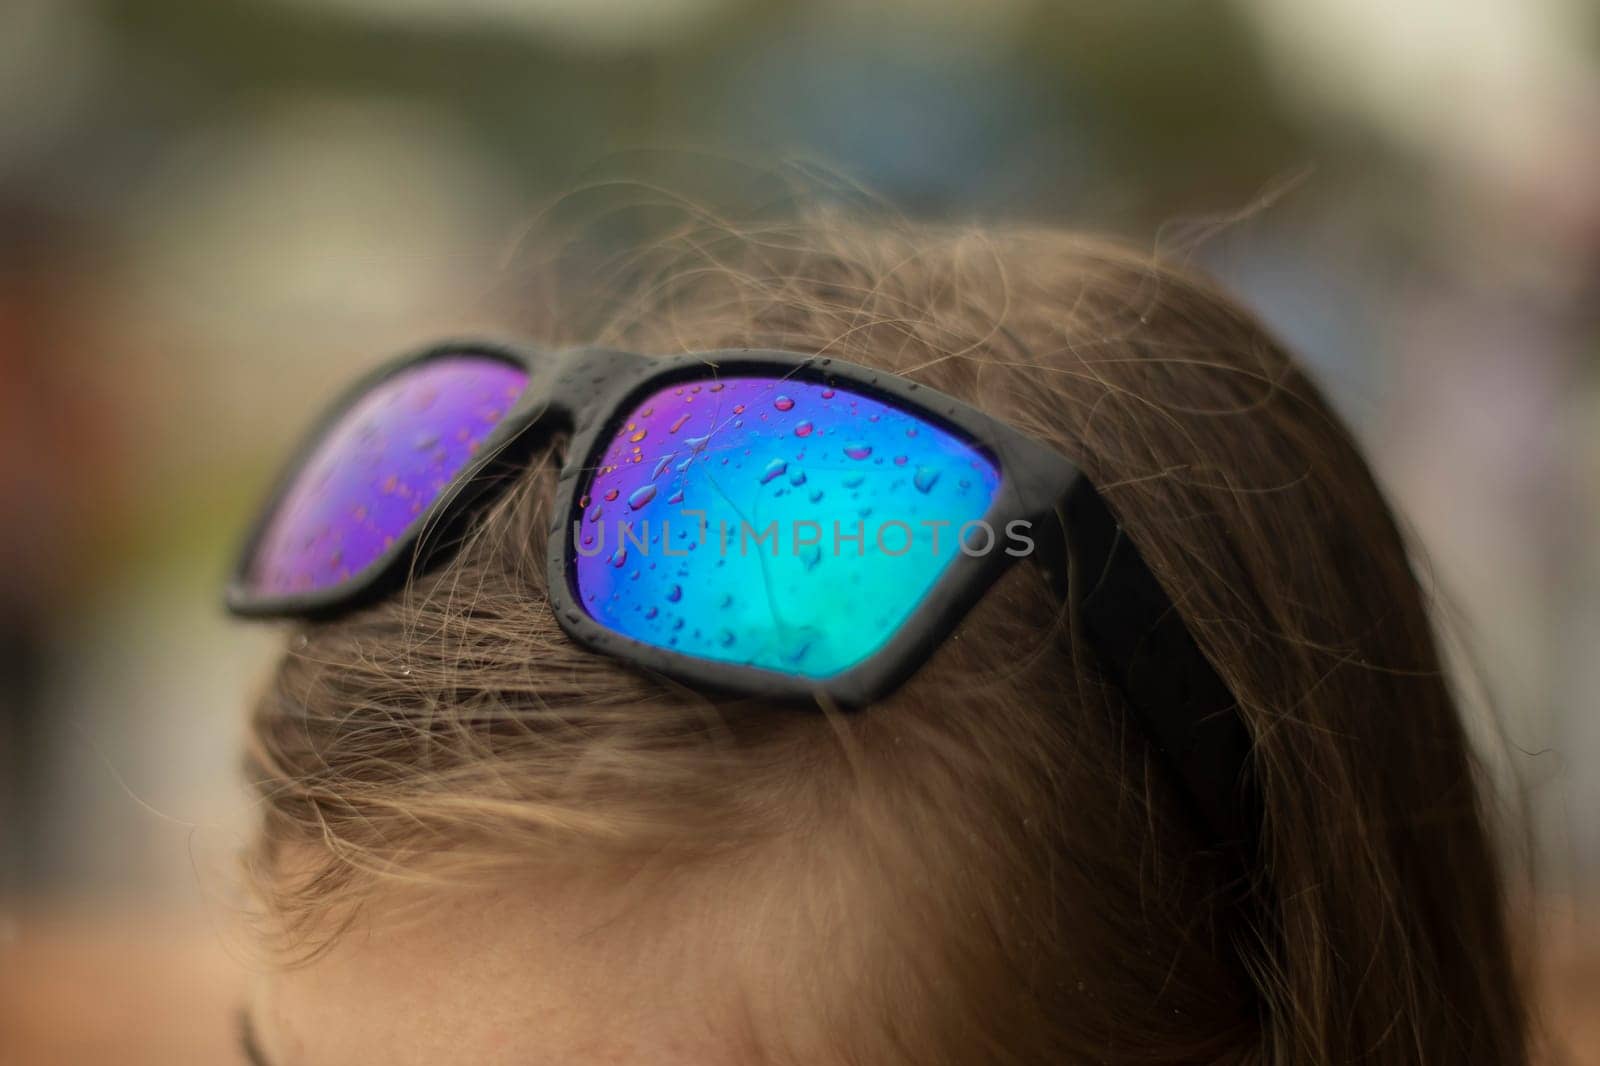 Glasses with raindrops. Glasses on head. Blue glass. Wet glass. Girl's head. Fashion accessory.